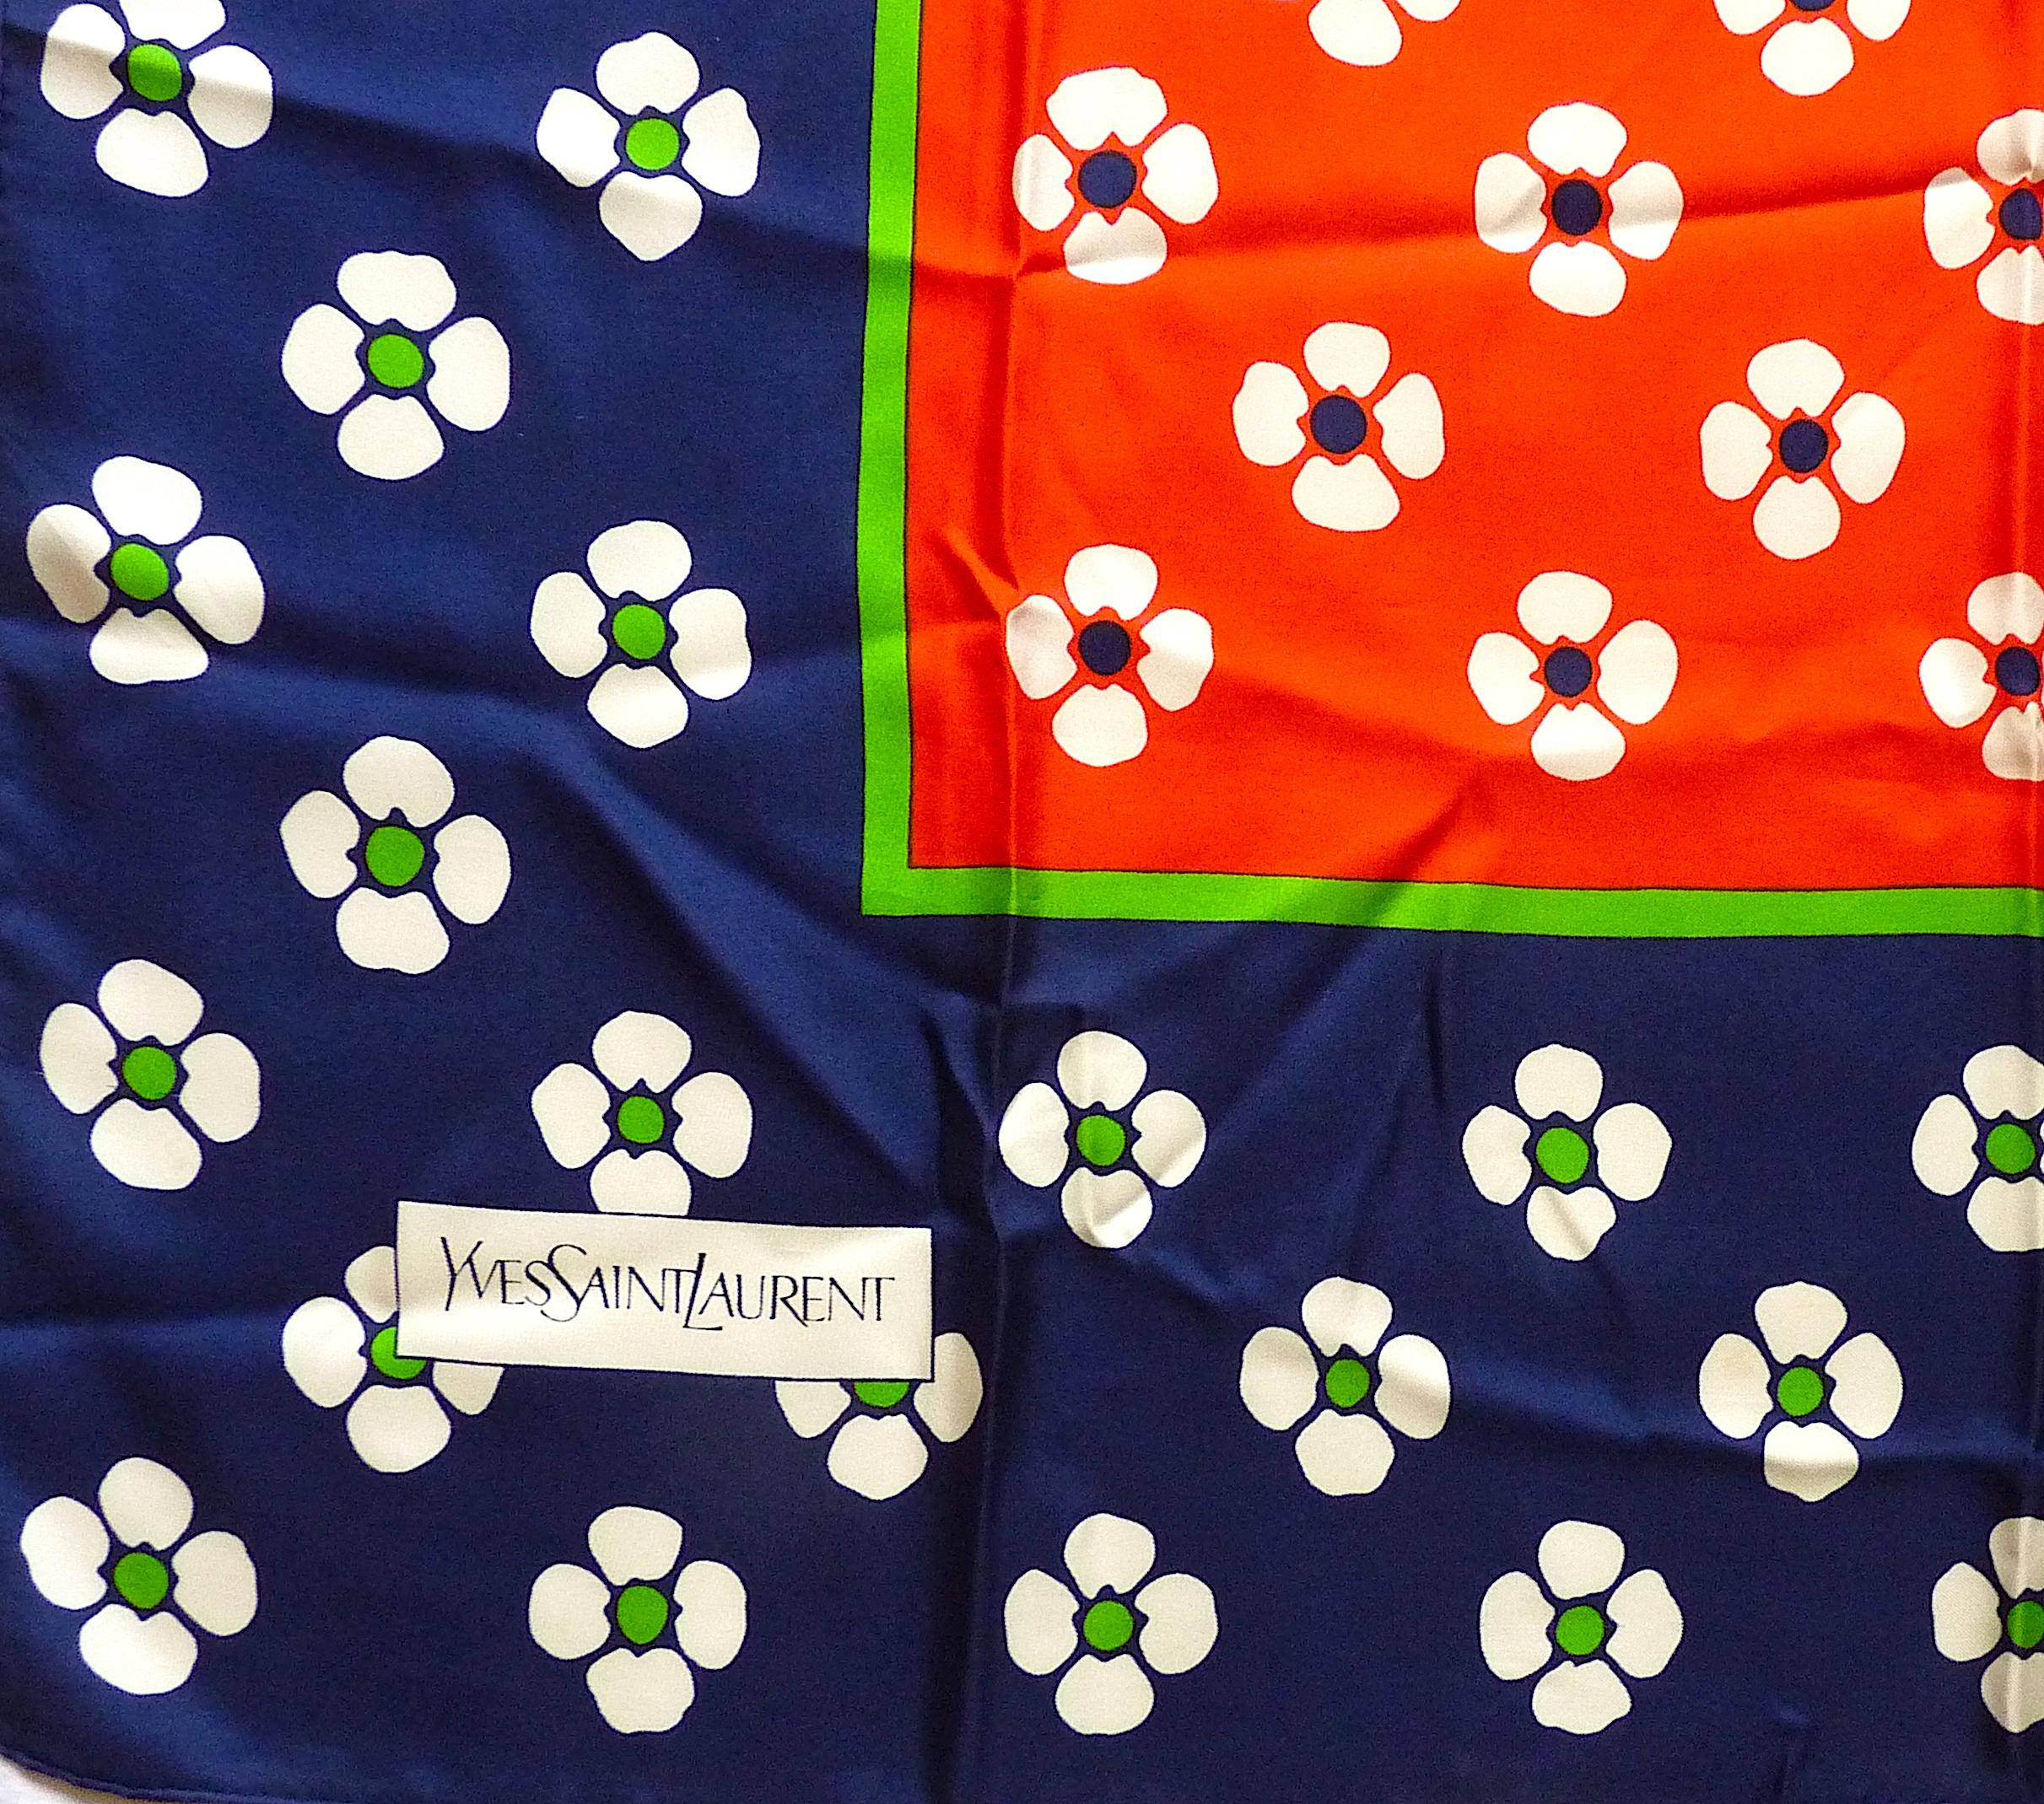 This is a YVES SAINT LAURENT Pop Flower Silk Scarf,  Vintage YSL from the 1970s, very 70's with its stylized flowers, in very good condition.

Colourways typically from the 70's : Navy, Bright Red, Apple Green

Signed YVES SAINT LAURENT at the